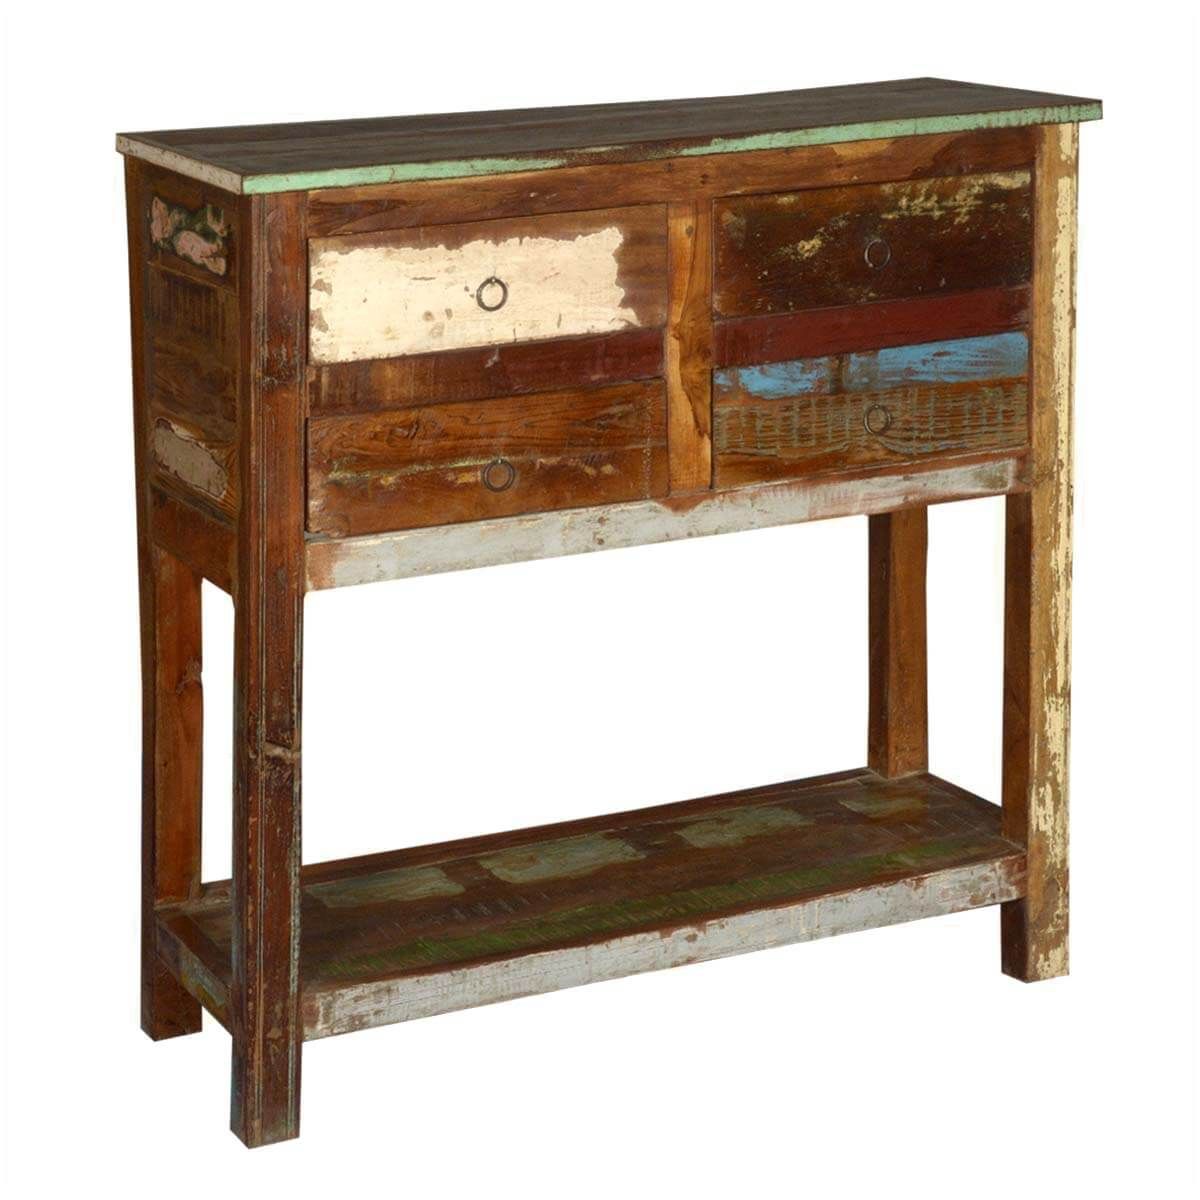 2 Tier Reclaimed Wood Console Table With 4 Drawers Intended For Reclaimed Wood Console Tables (View 7 of 20)